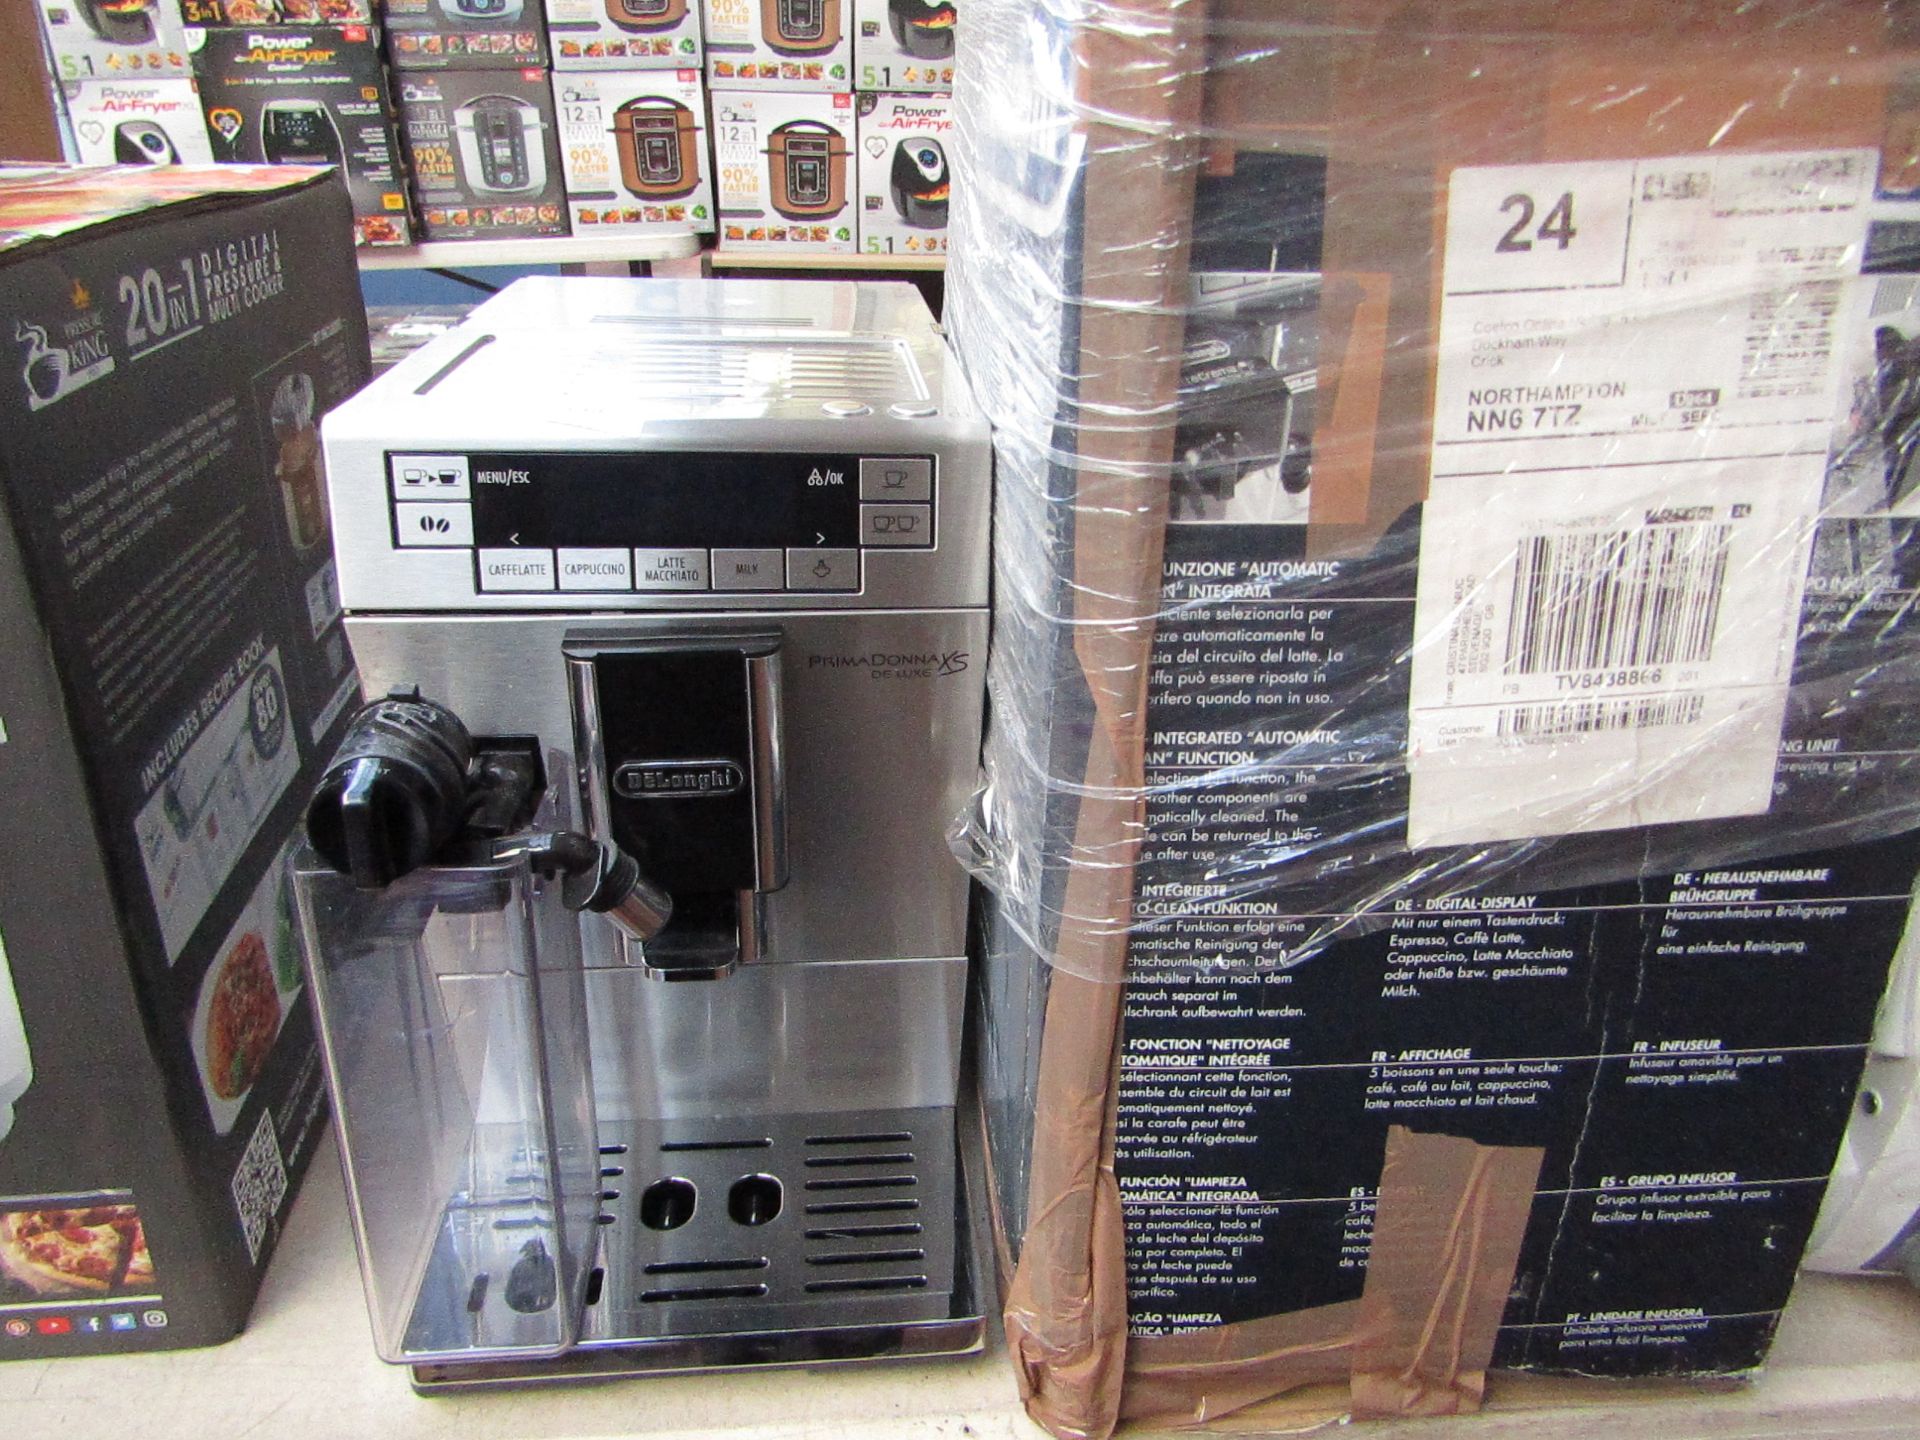 DELONGHI - PrimaDonna XS De Luxe - Coffee Machine - Untested, Damaged and Boxed.